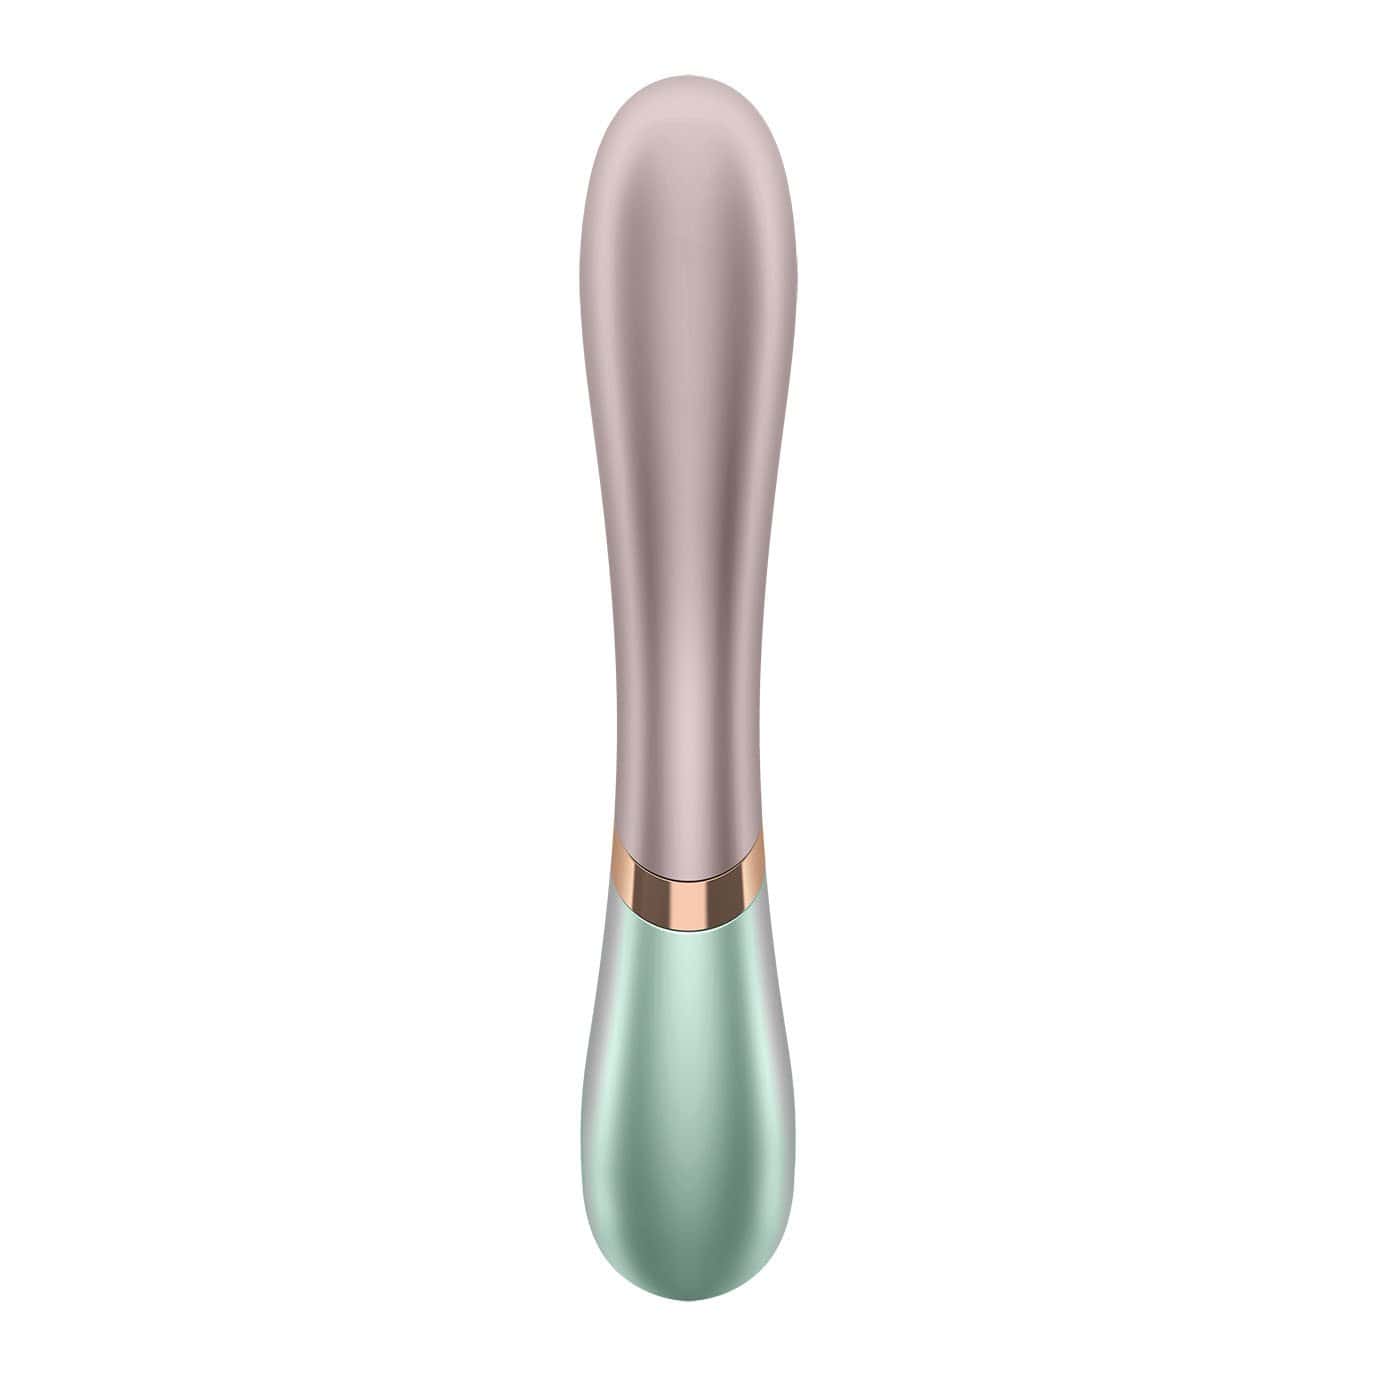 Satisfyer - Hot Lover Warming Rabbit Vibrator with Bluetooth and App (Pink/Mint) Rabbit Dildo (Vibration) Rechargeable 520219916 CherryAffairs